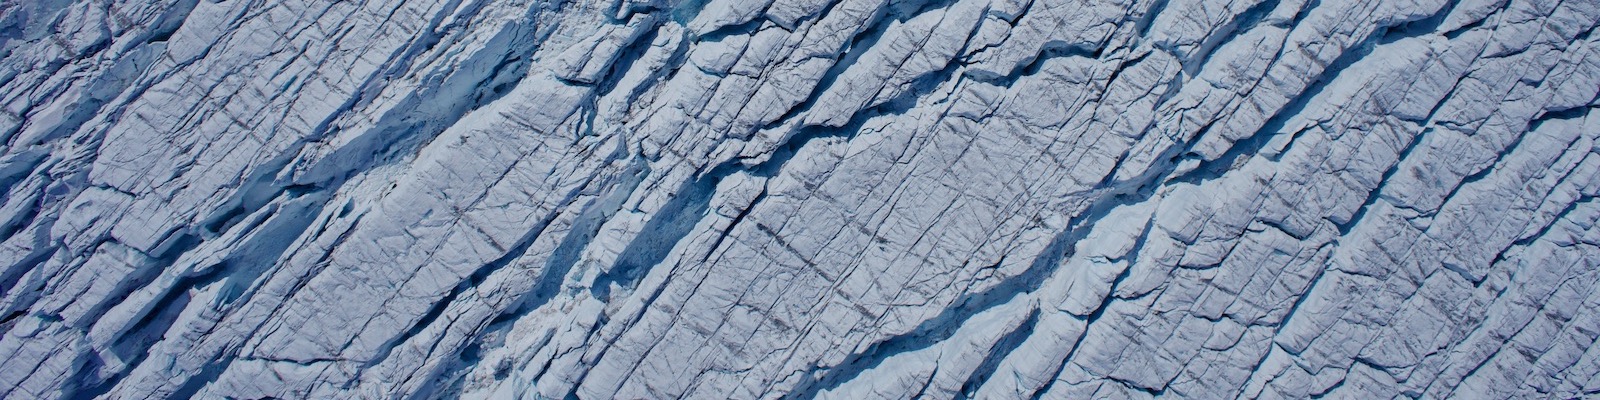 An aerial image of crevasses on the Greenland Ice Sheet